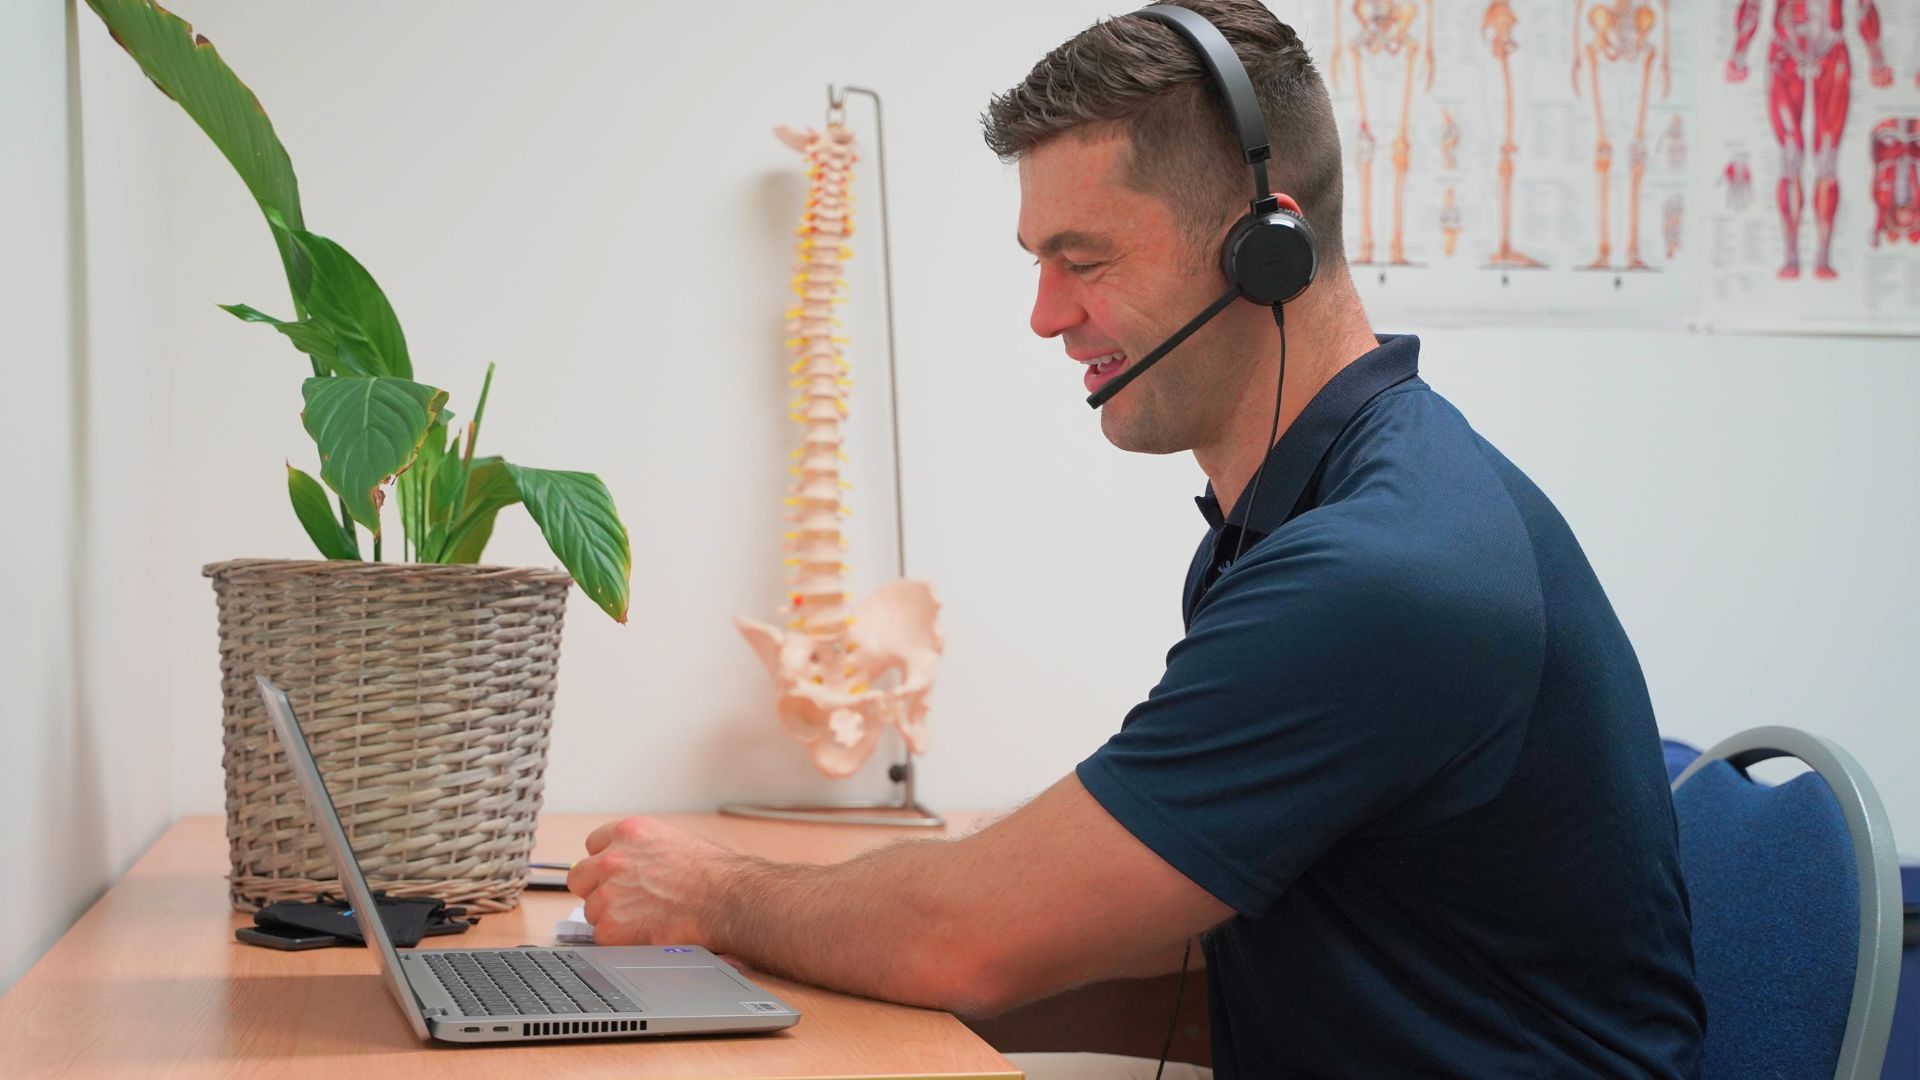 Physio in an online consultation